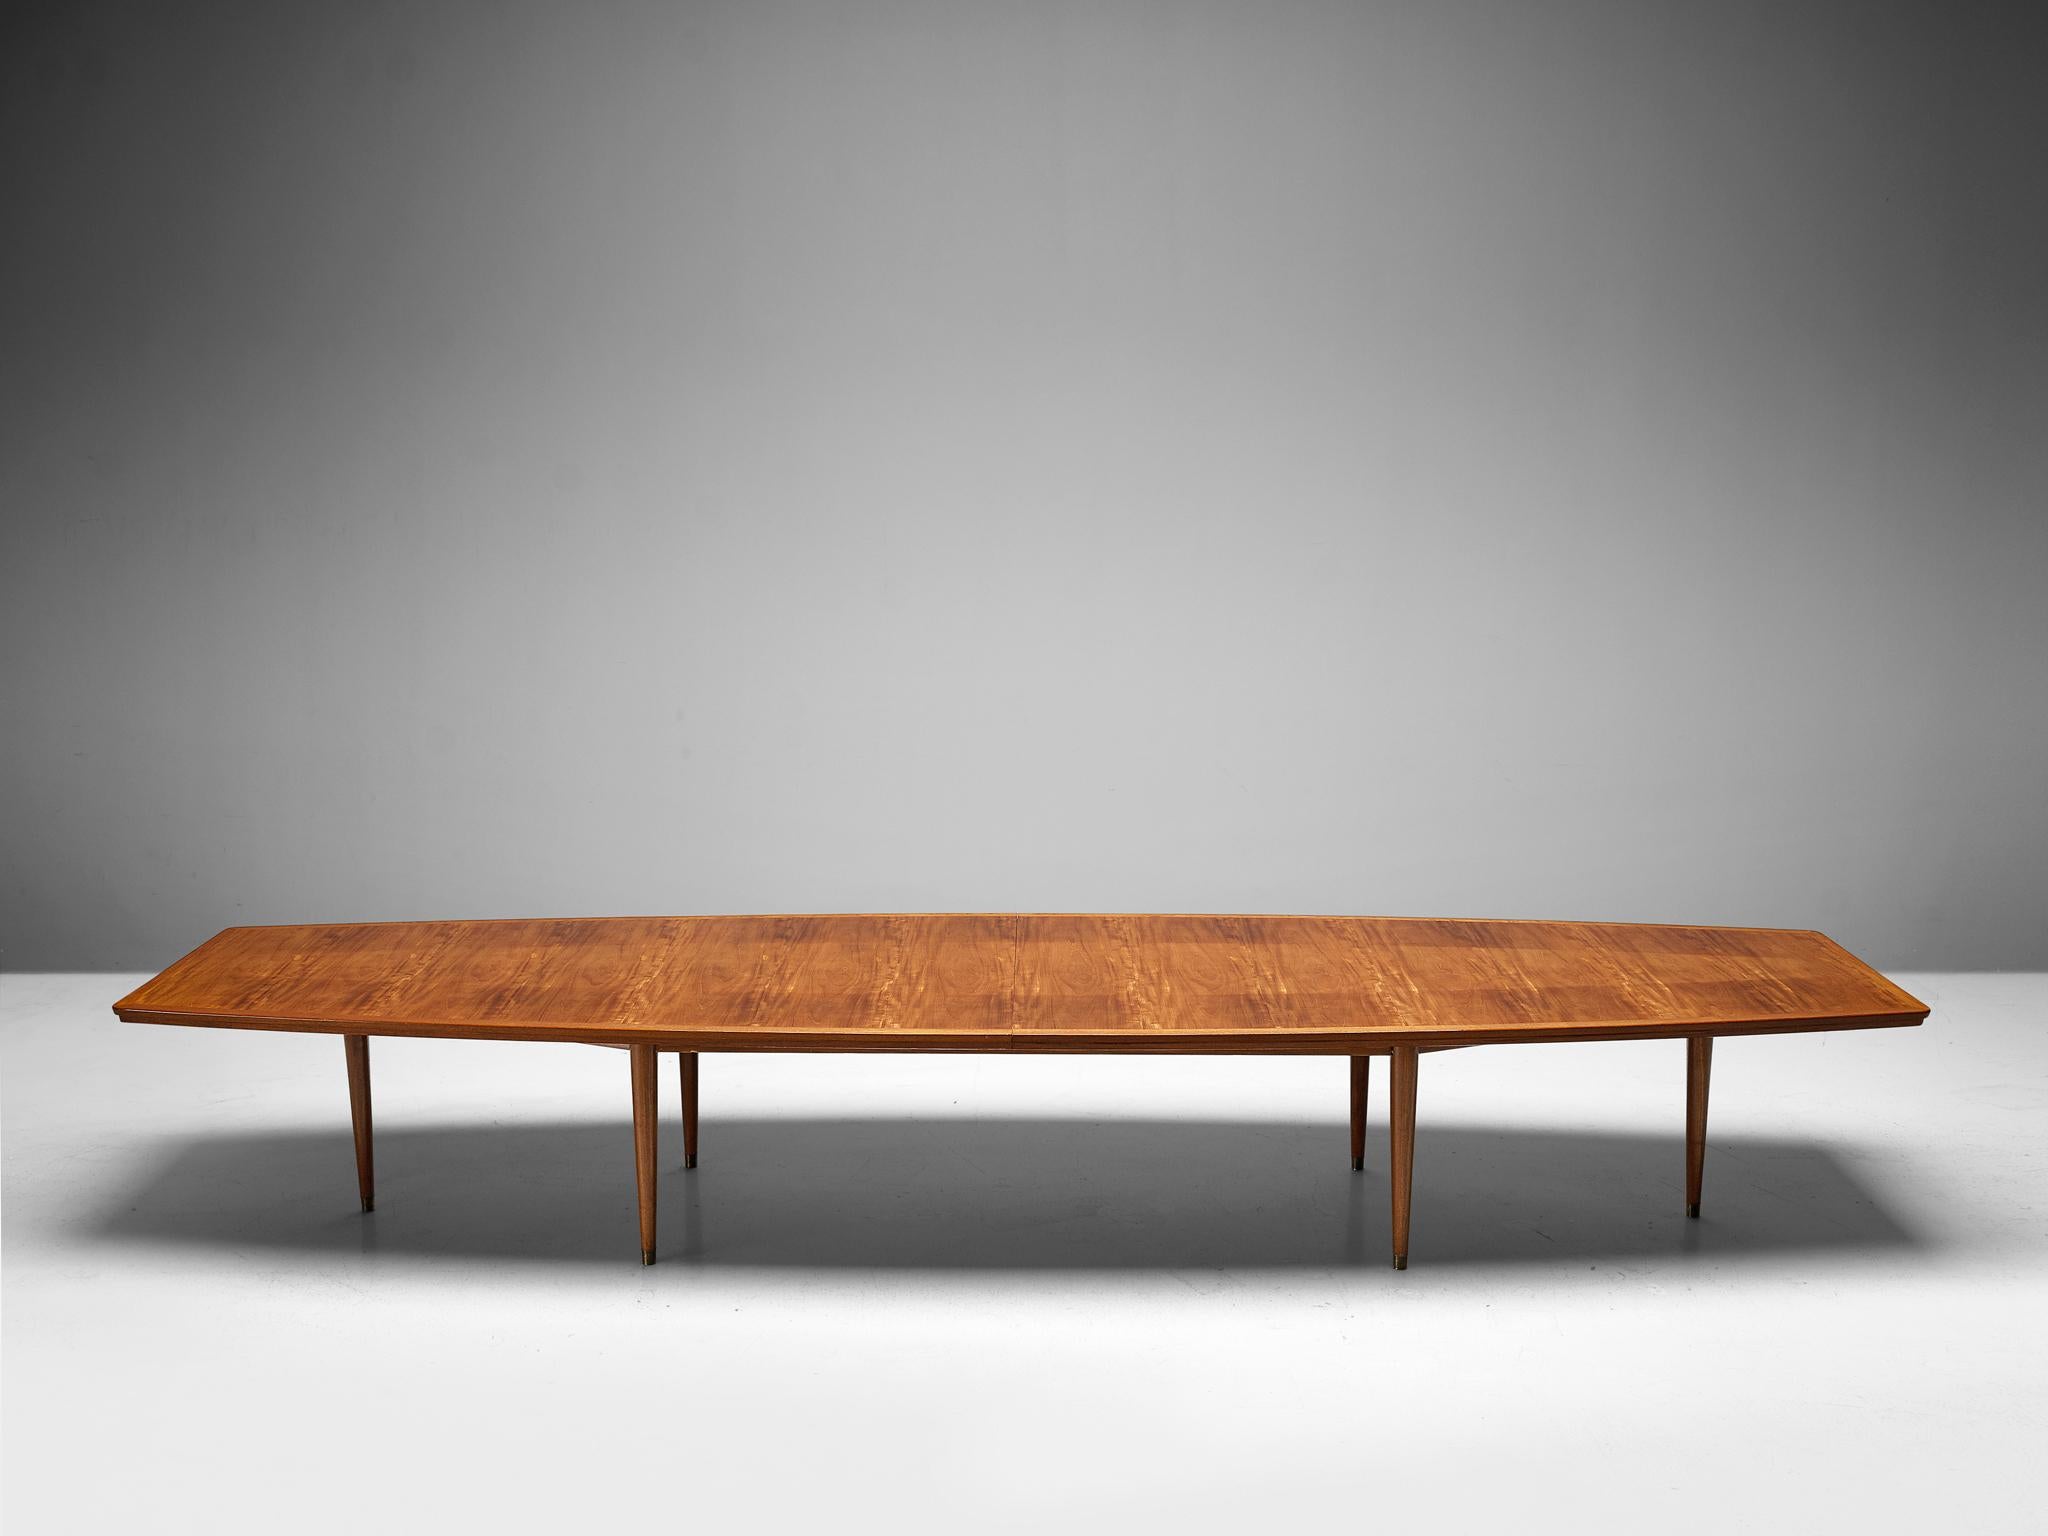 Large conference table, mahogany, Denmark, 1960s

Very large conference or dining table with a beautifully veneered mahogany top. The exceptional contrast and warm color of the mahogany give this table an authentic and luxurious look. The tabletop